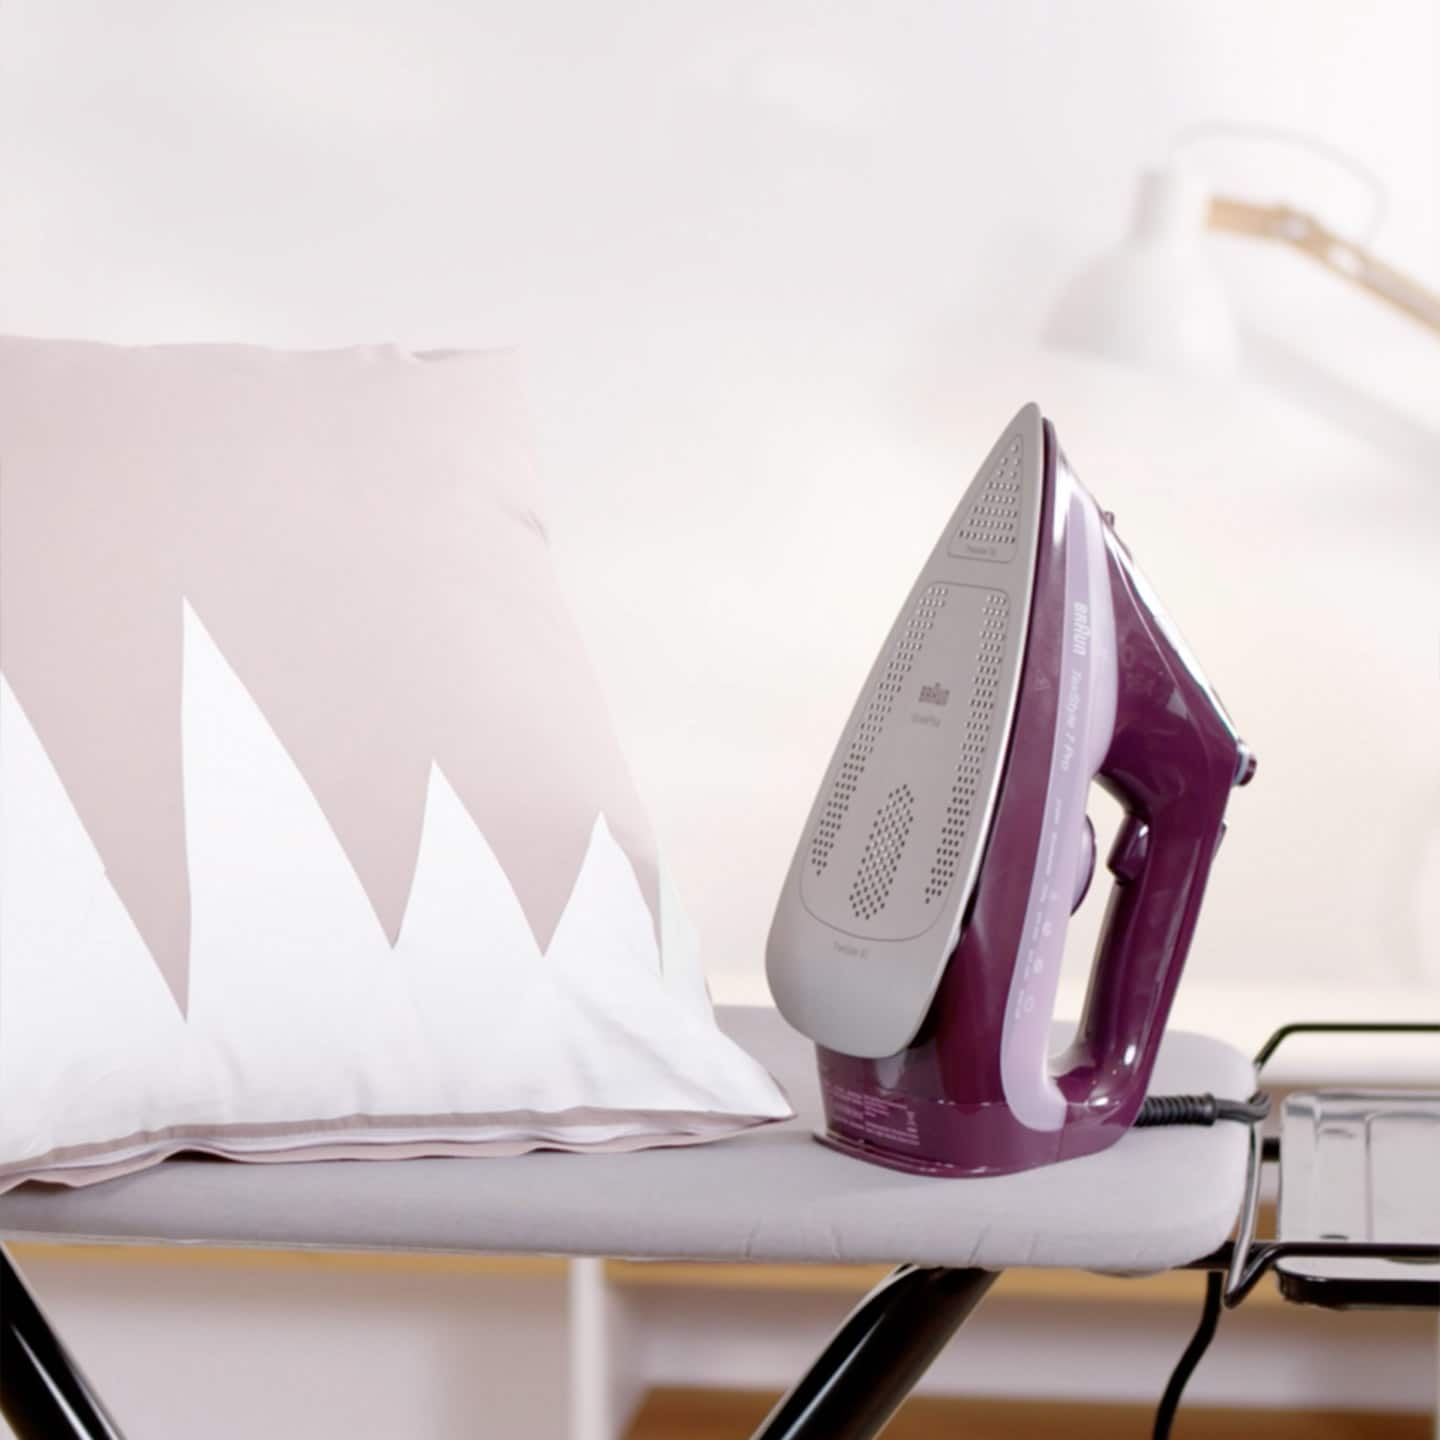 A purple iron placed on a table next to a pillow.